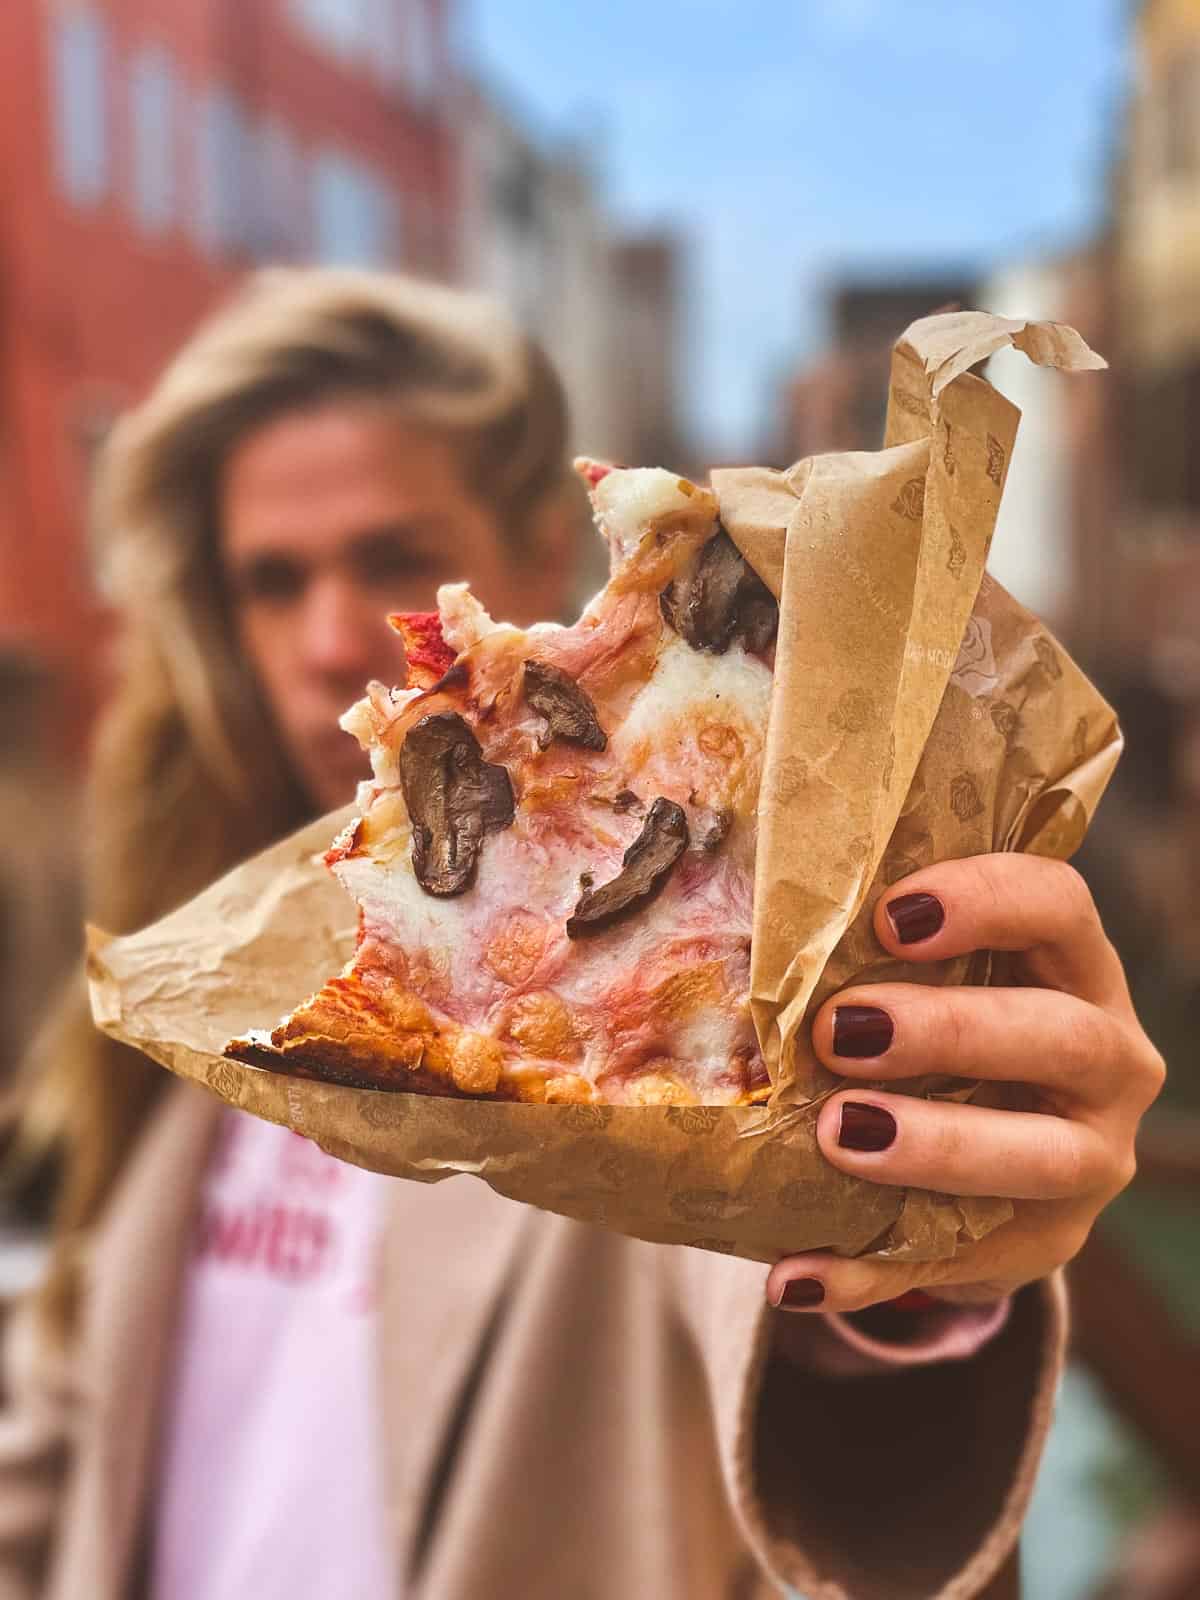 Woman with a Pizza slice in the hand